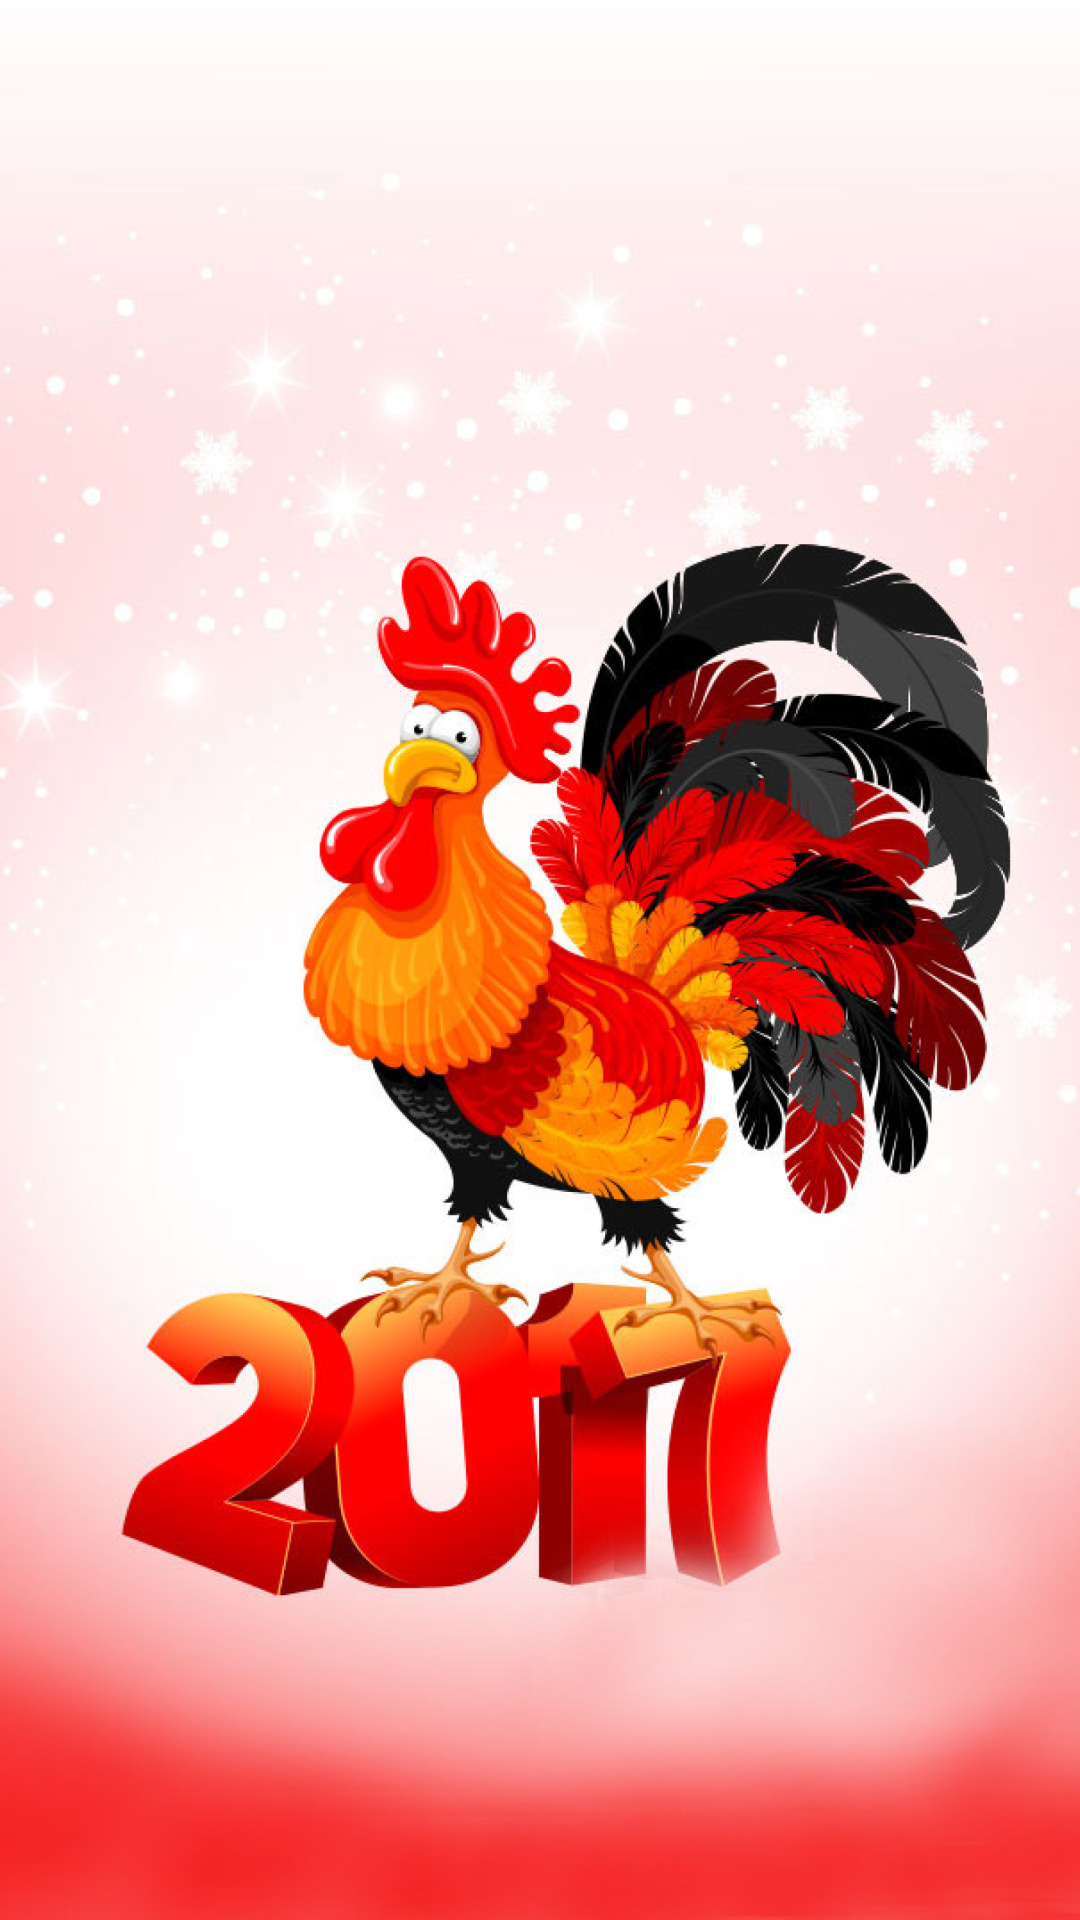 Das 2017 New Year of Cock Wallpaper 1080x1920